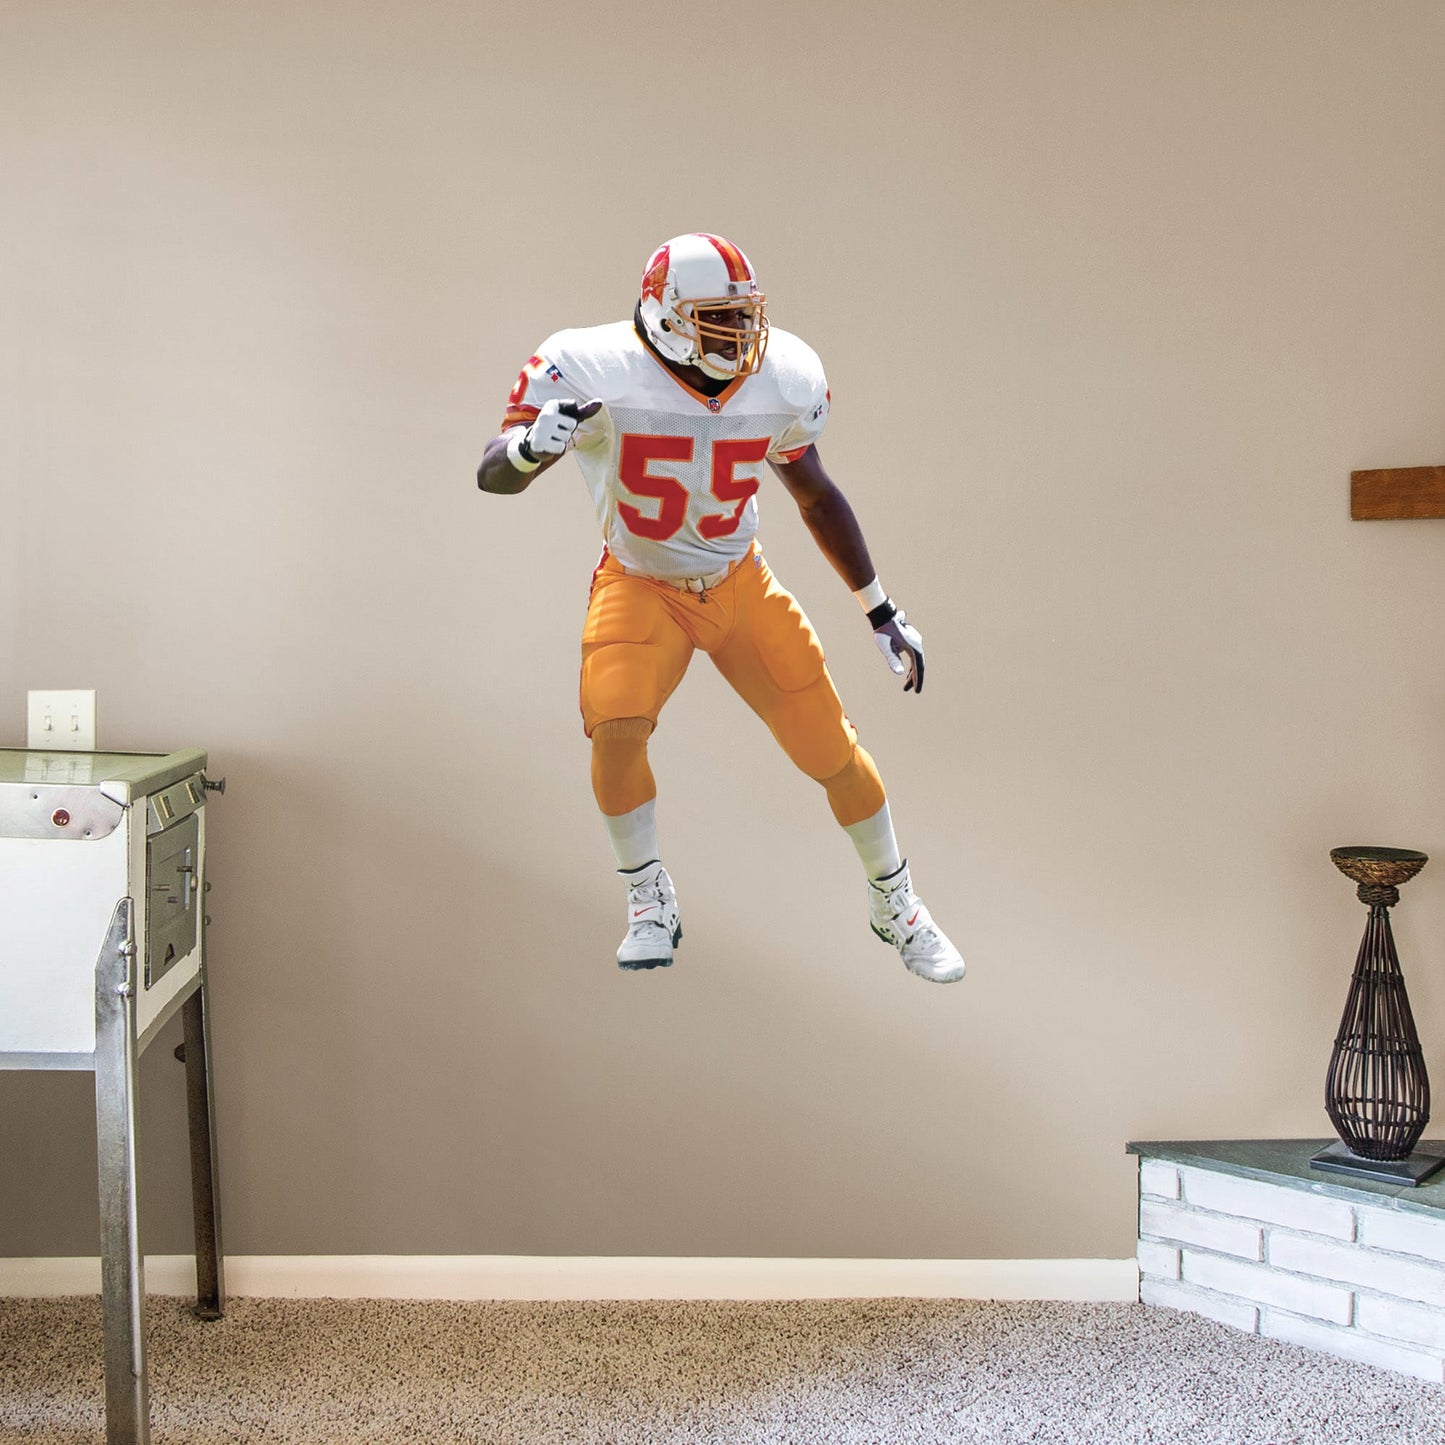 Giant Athlete + 2 Decals (33"W x 51"H) Immortalize The Sheriff's amazing career on your wall with this officially licensed decal. Derrick Brooks' amazing accolades range from Super Bowl champion to his 11 Pro Bowl appearances, and he has rightfully taken his place in the Pro Football Hall of Fame. This high-quality decal makes a great gift, and it can be removed and reaffixed to walls as you decide on the best place to show off your Bucs pride for this legend's impressive impact on the sport.